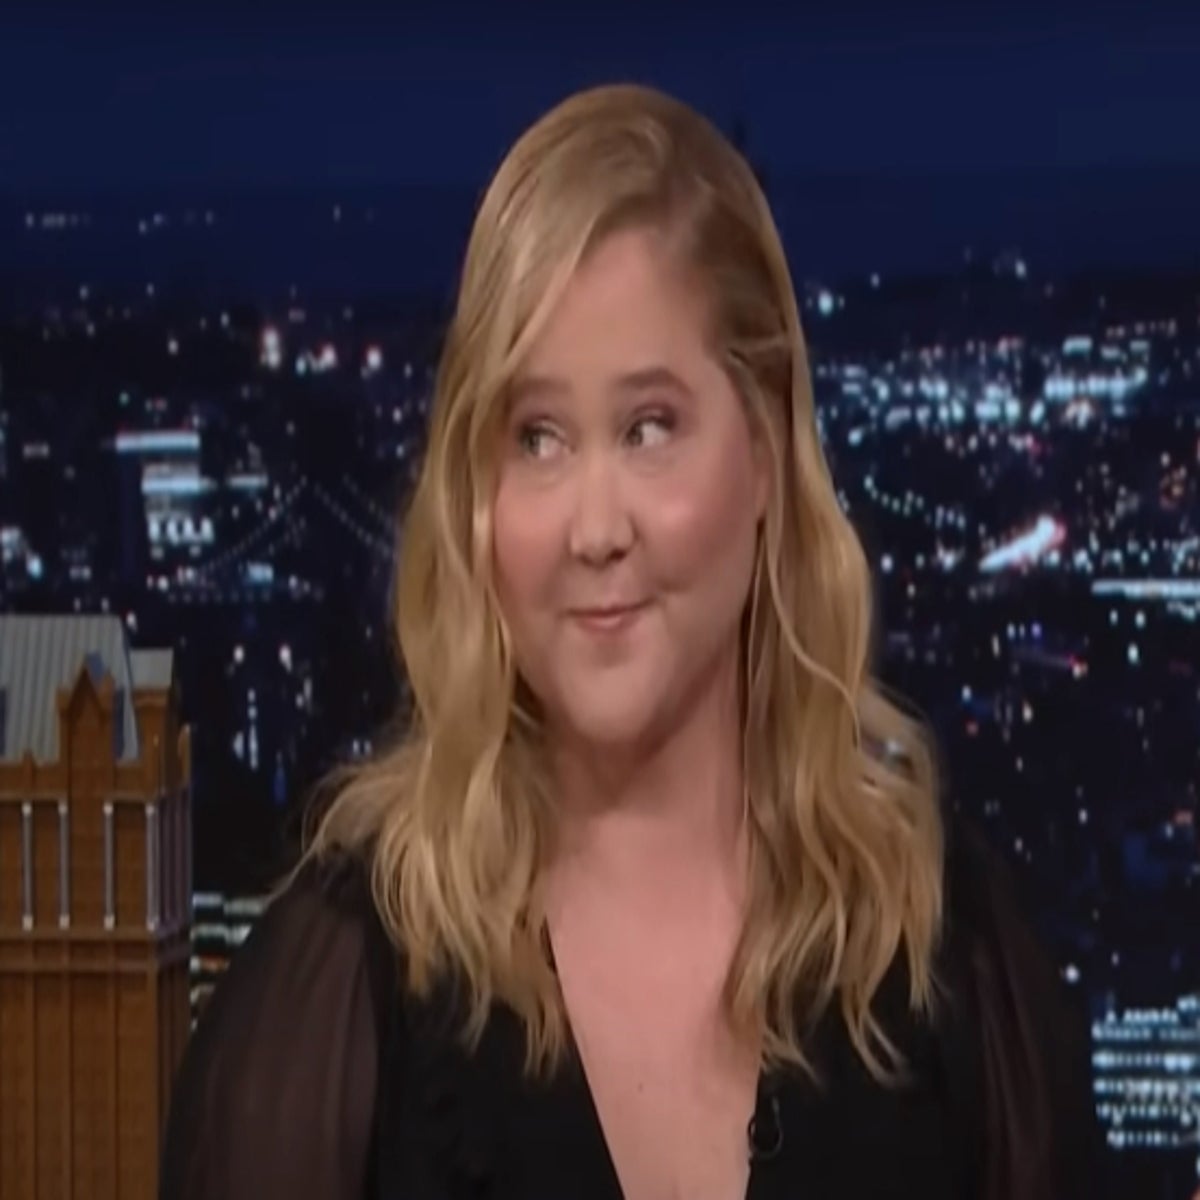 Amy Schumer Shares New Health Condition Causing 'Puffier' Face - Parade